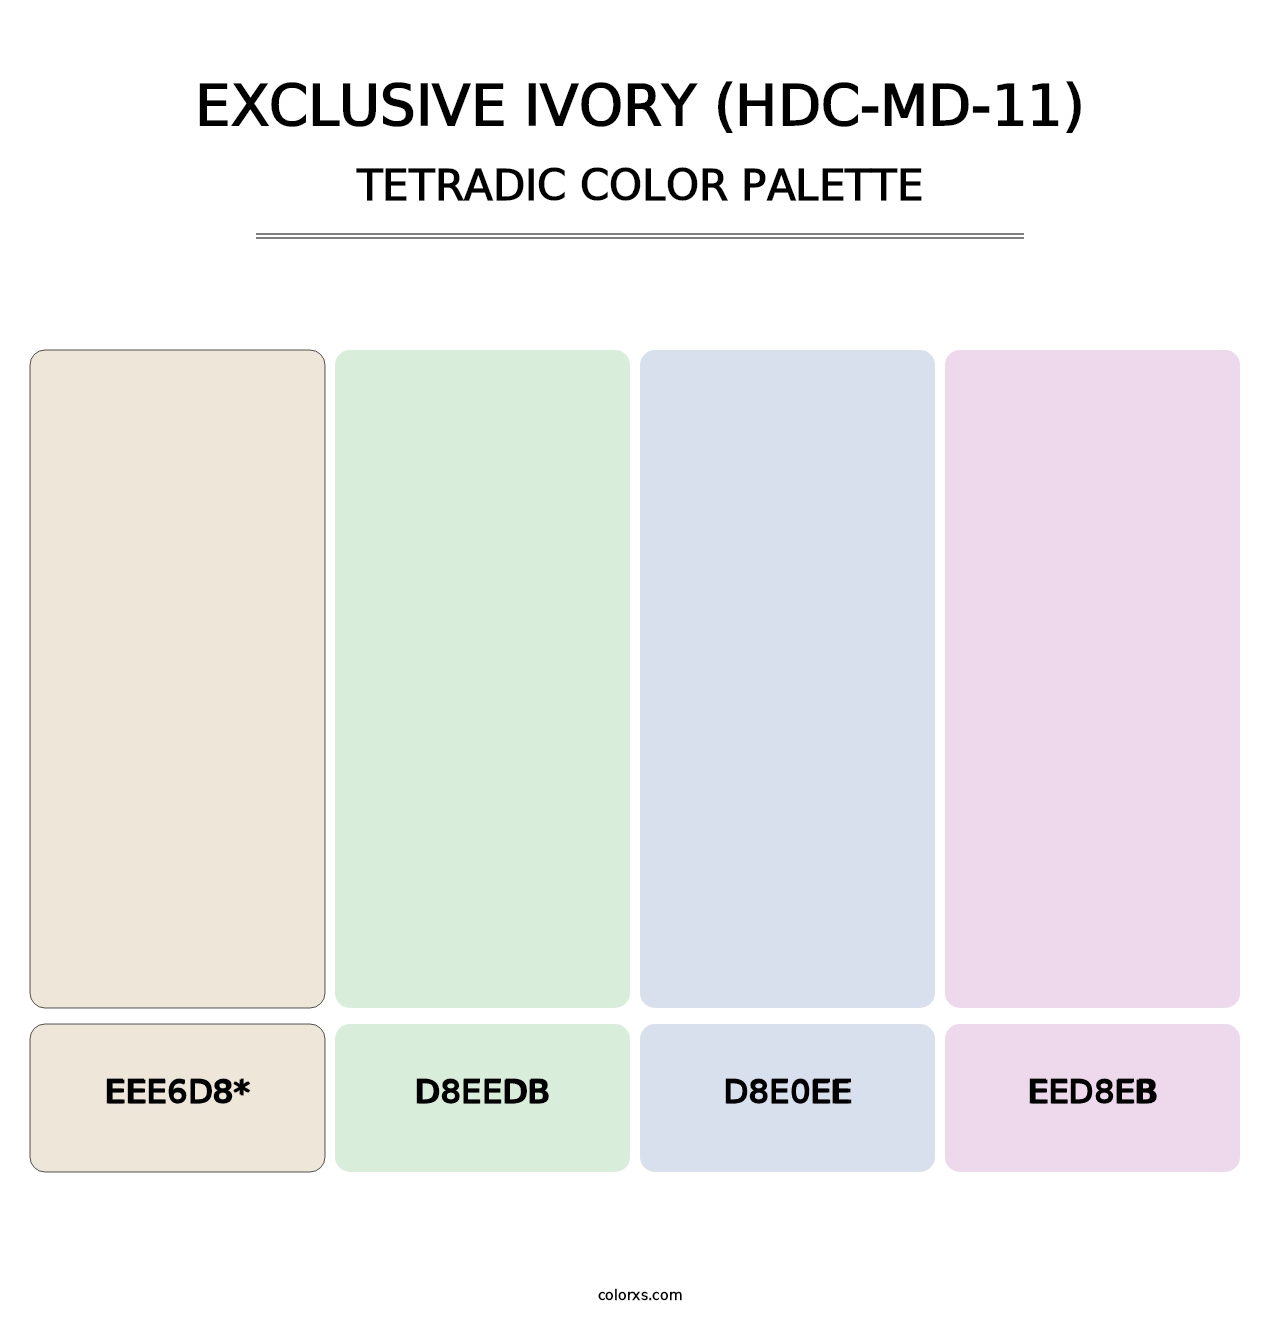 Exclusive Ivory (HDC-MD-11) - Tetradic Color Palette